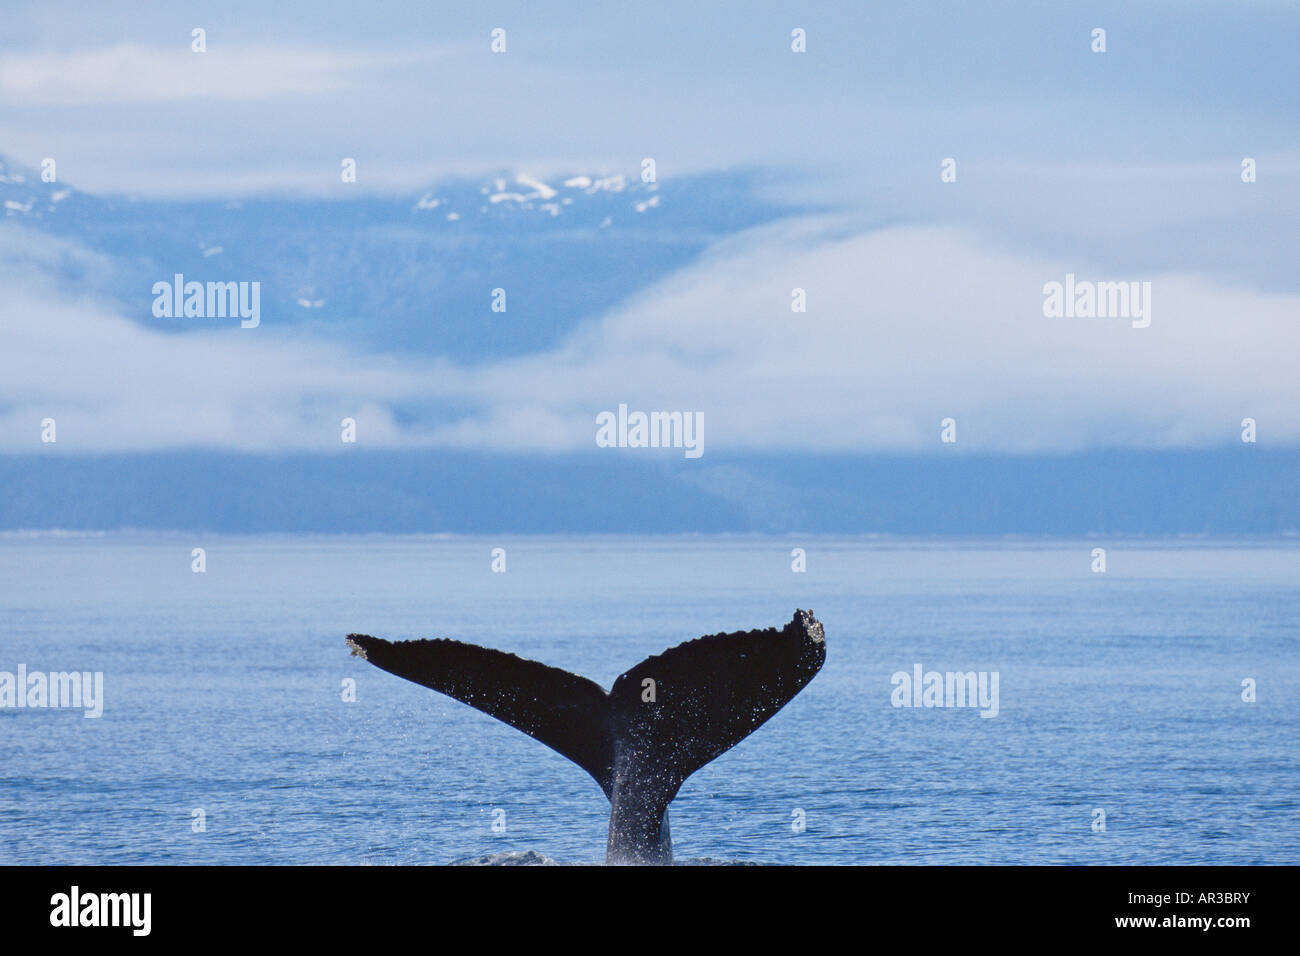 A whales tail Stock Photo